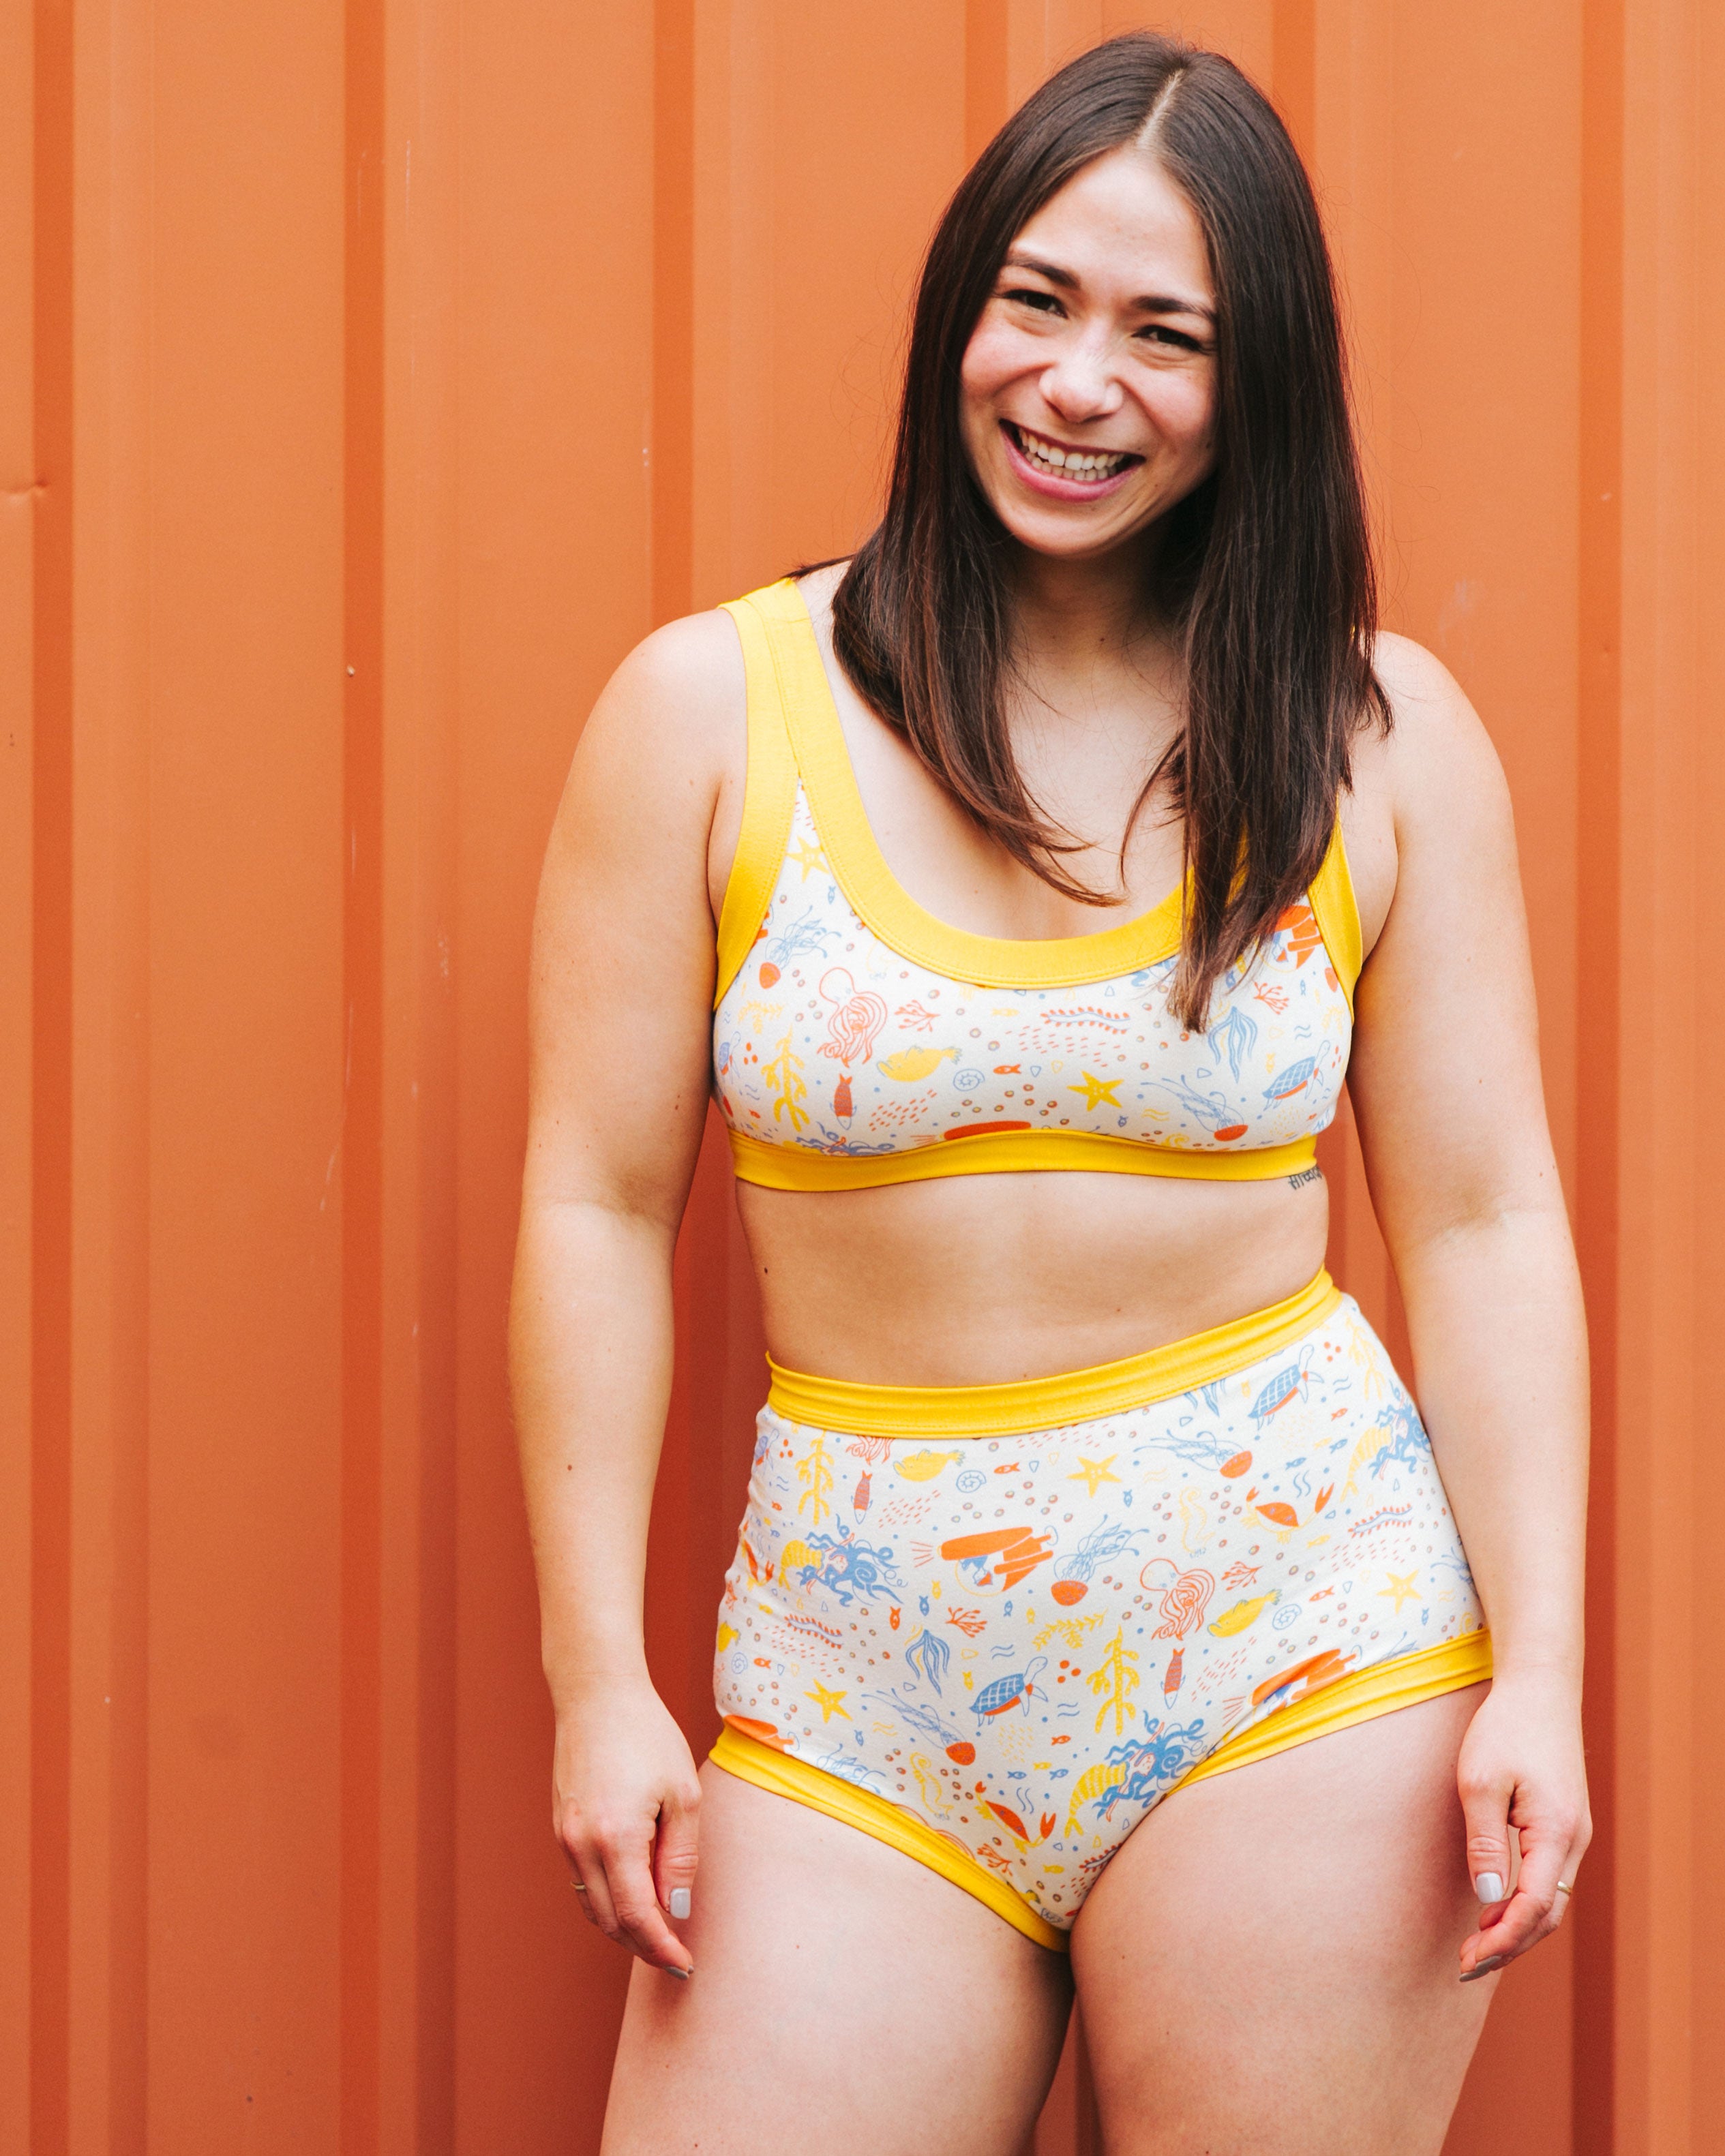 Model smiling wearing Thunderpants organic cotton Sky Rise style underwear and Bralette in our Under the Sea print: Vanilla with small blue, orange, and gold underwater prints with Golden Yellow binding.